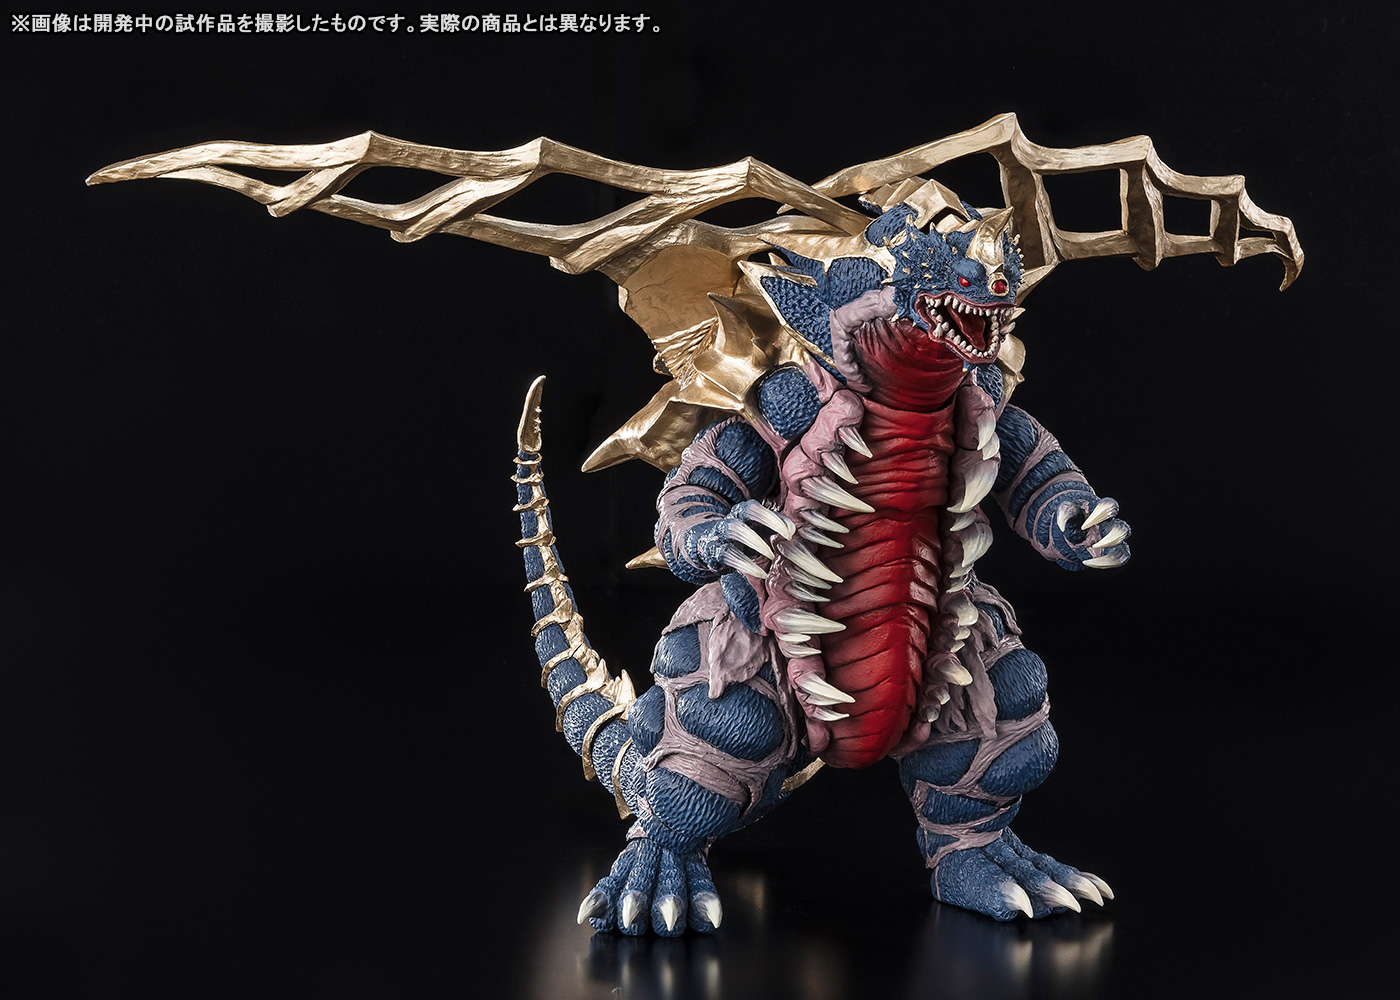 Destroy everything in the world! The most powerful monster that transcends time and space &quot;S.H.Figuarts KING OF MONS&quot; June 26 (Wednesday) Tamashii web shop Orders start!